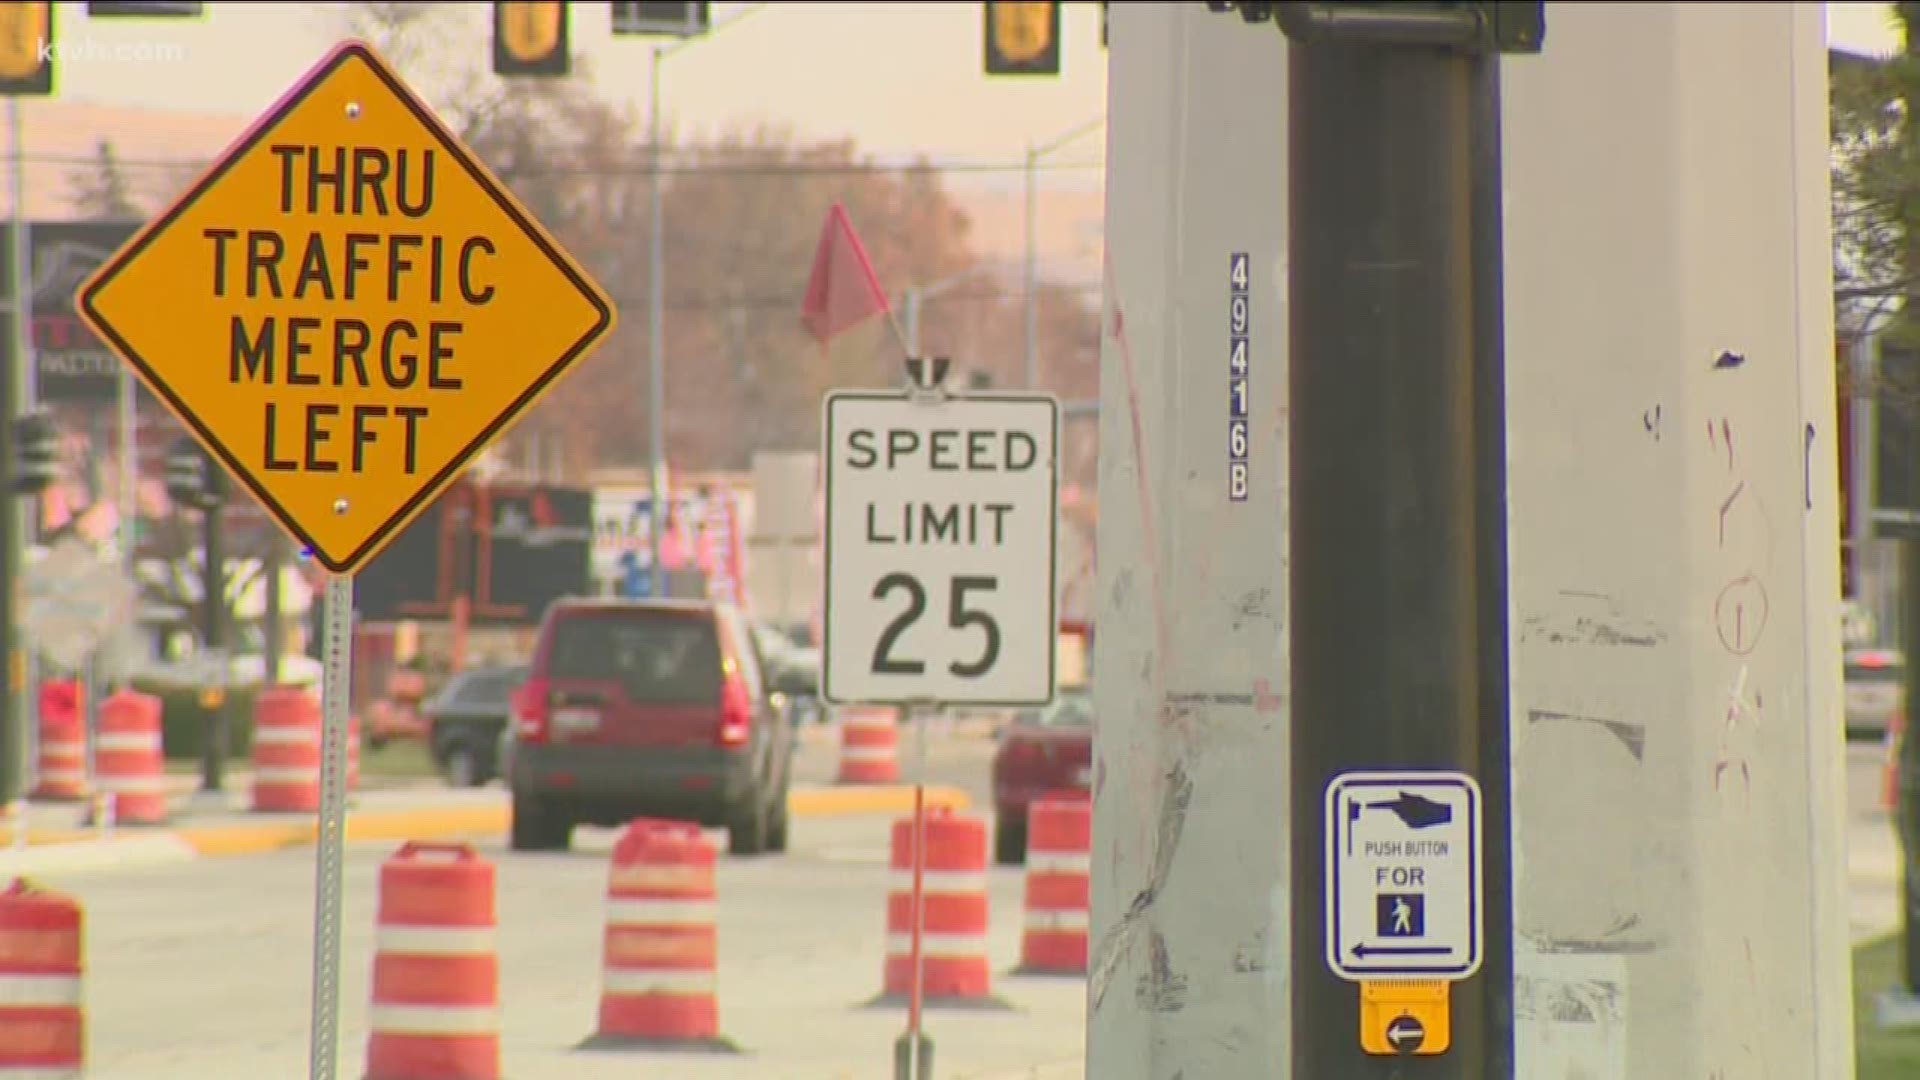 ACHD says the new intersection will reduce wait times for drivers.